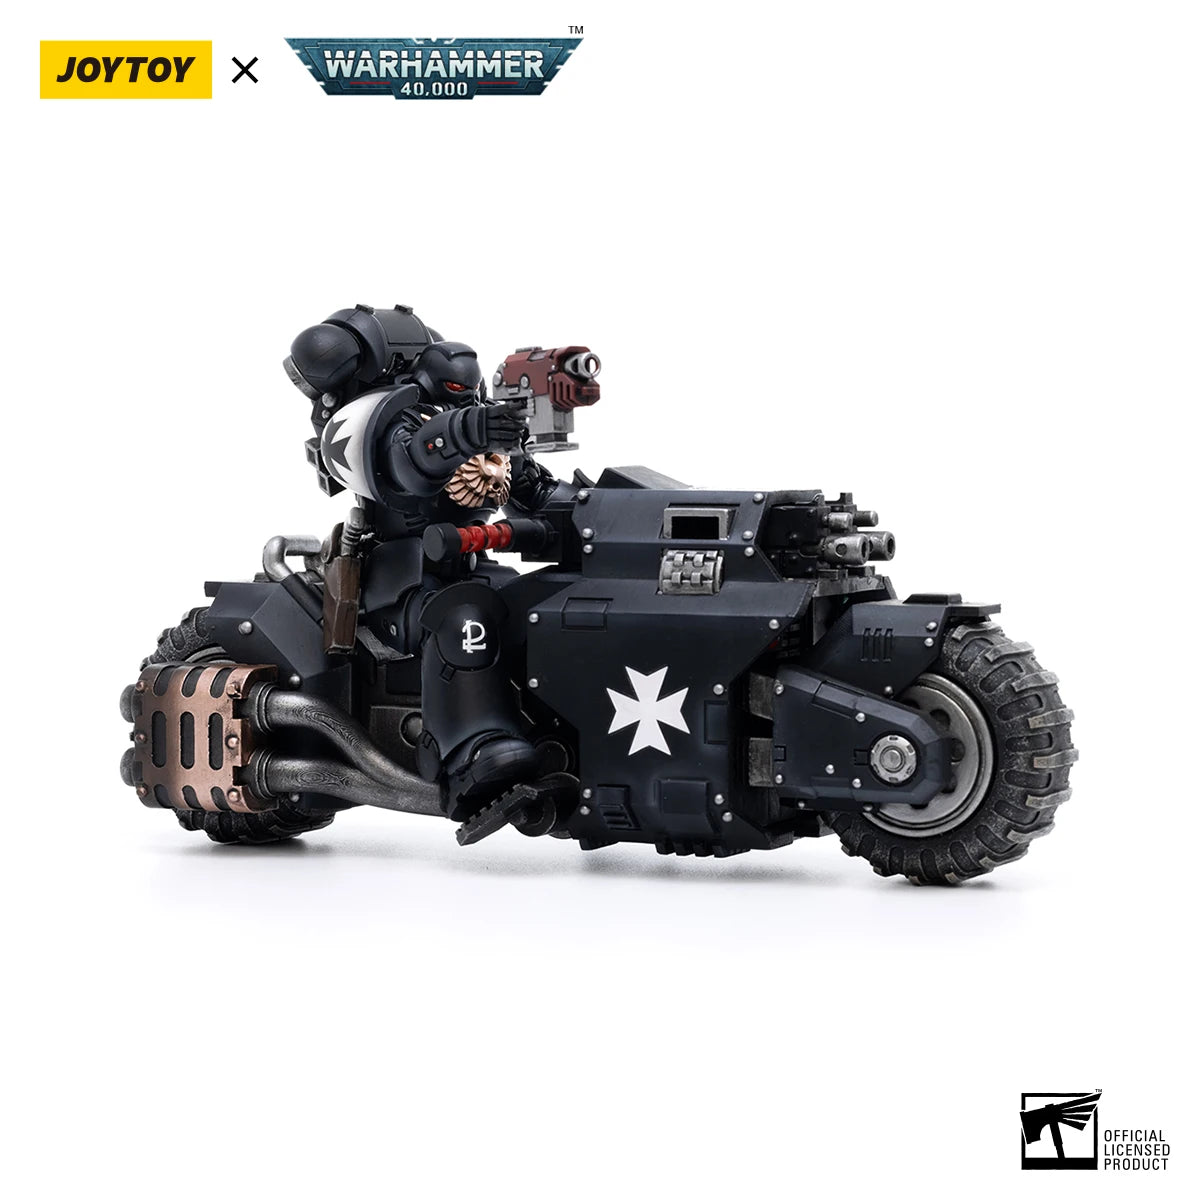 JOYTOY 1/18 Action Figure Warhammer 40K Black Templars Outriders Anime Collection Military Model